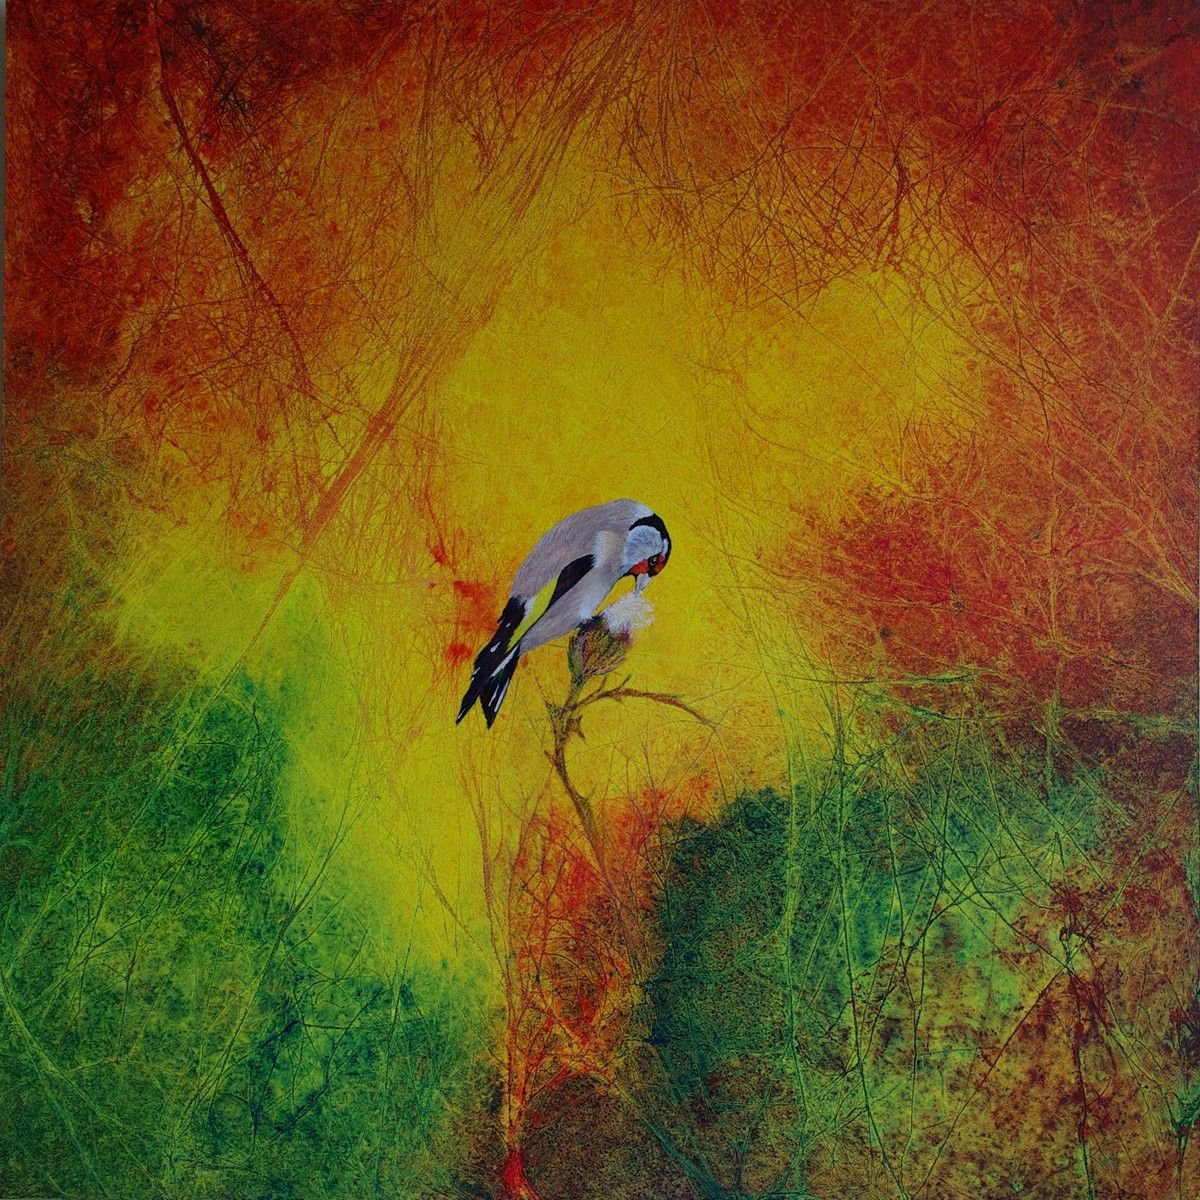 Goldfinch, a colurful bird painting with abstract background by oconnart